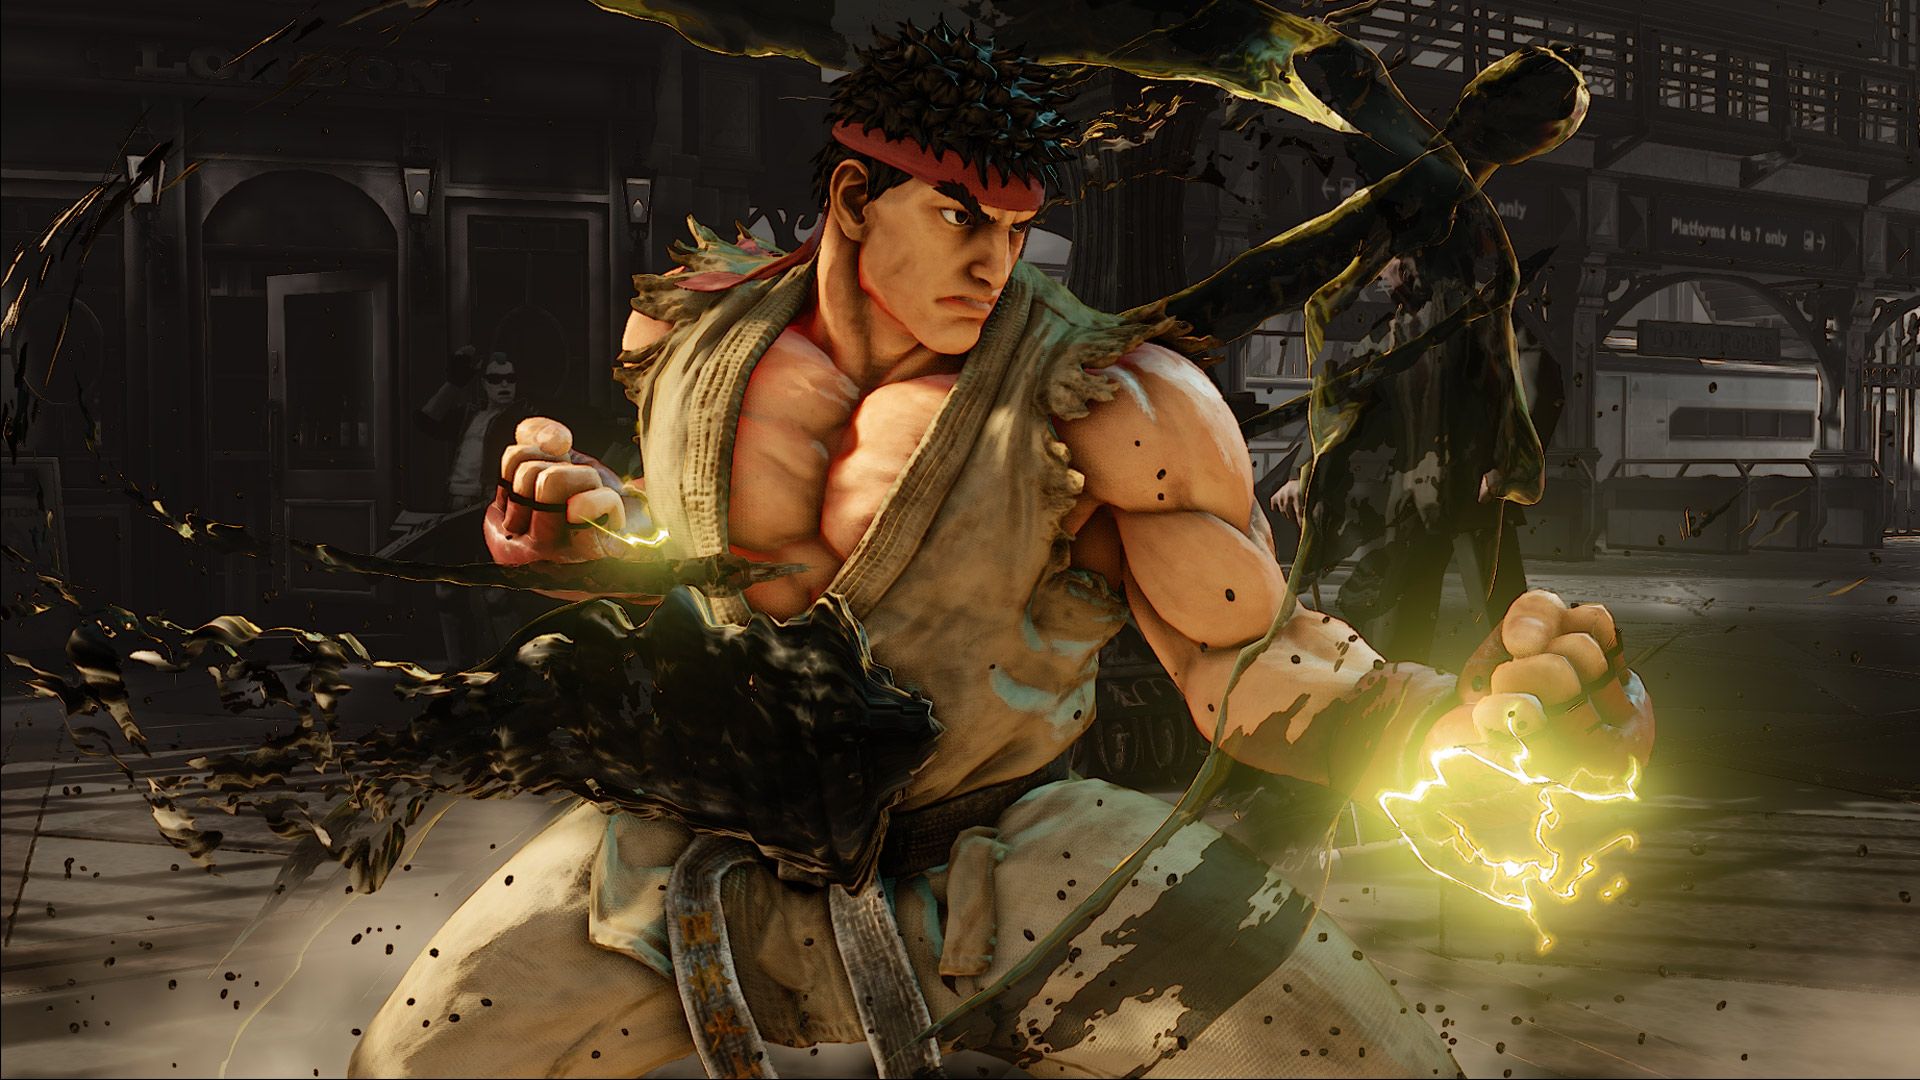 Adventures with Hot Ryu shows how Street Fighter 5 does steamy bromance -  Polygon